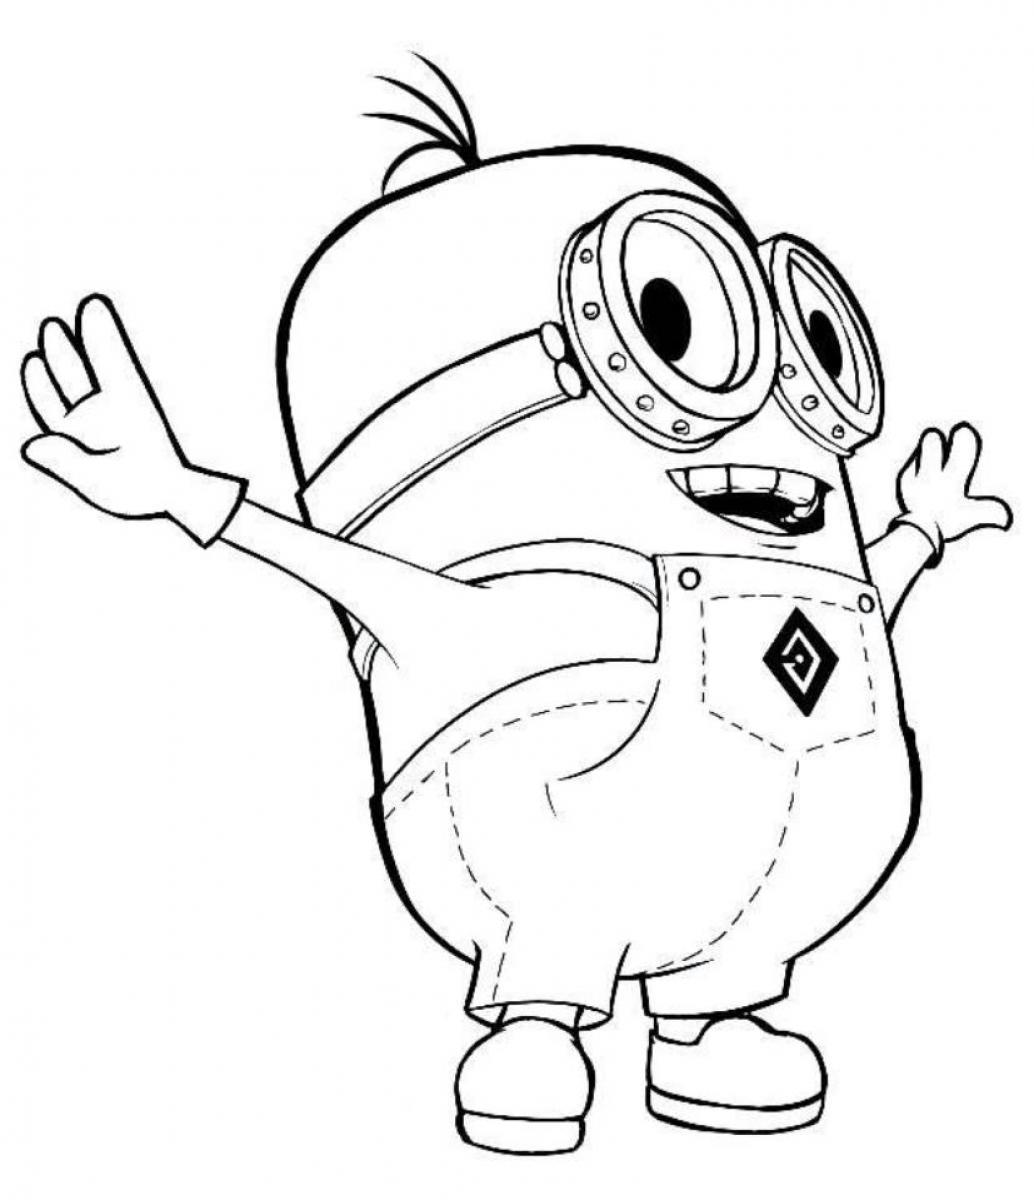 minions coloring pages free coloring pages printable pictures to color kids minions coloring pages 1 1